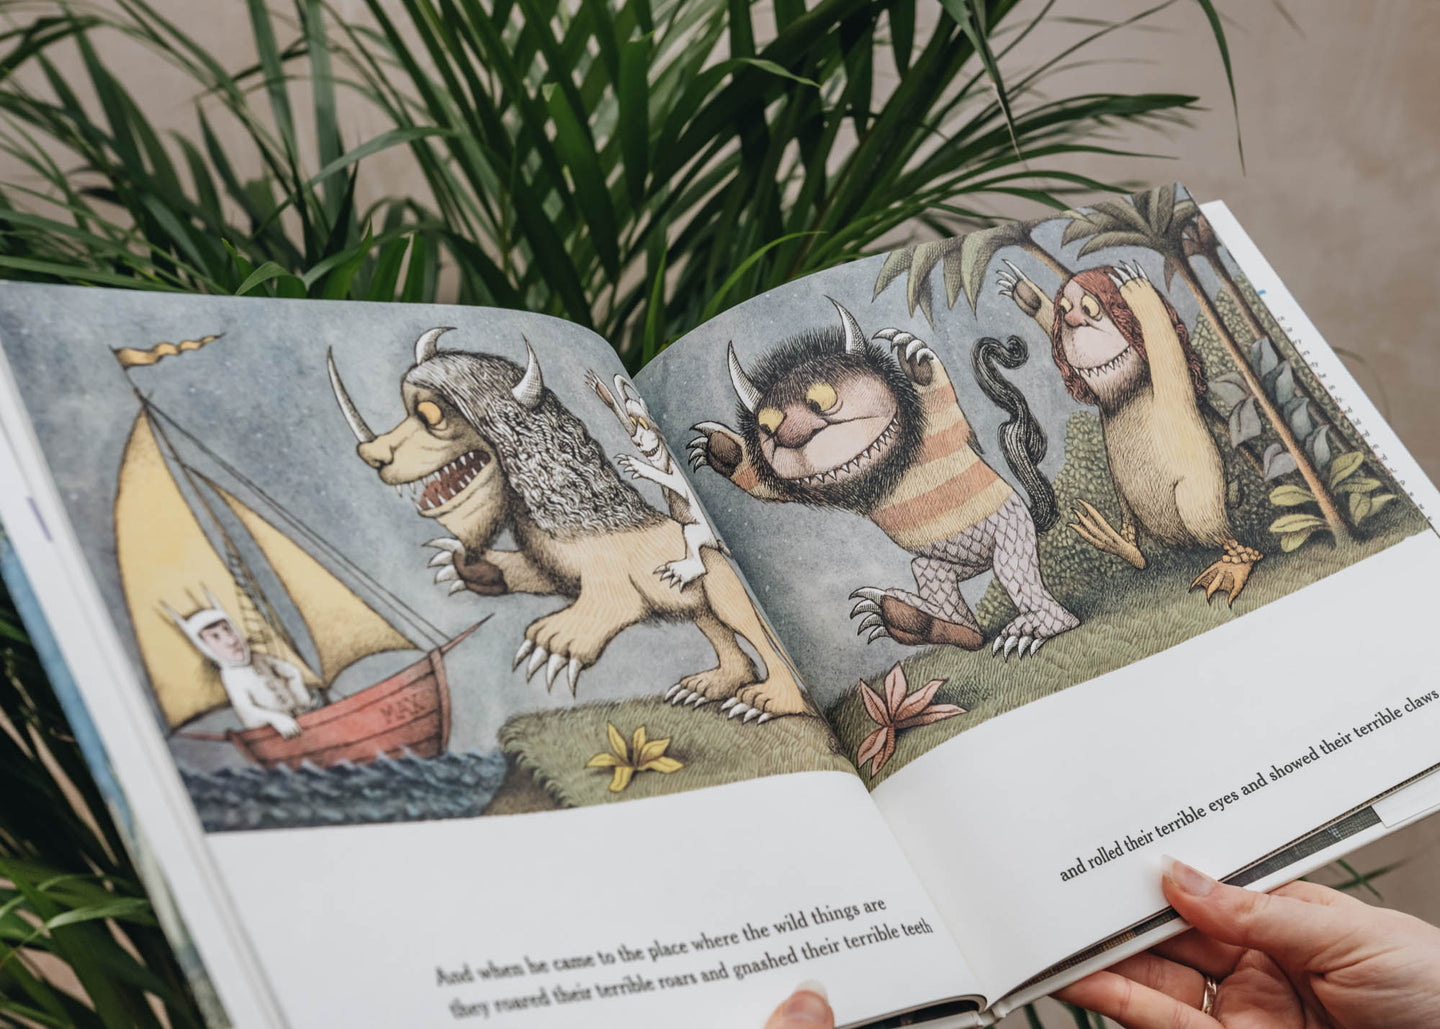 Where The Wild Things Are: 60th Anniversary Edition